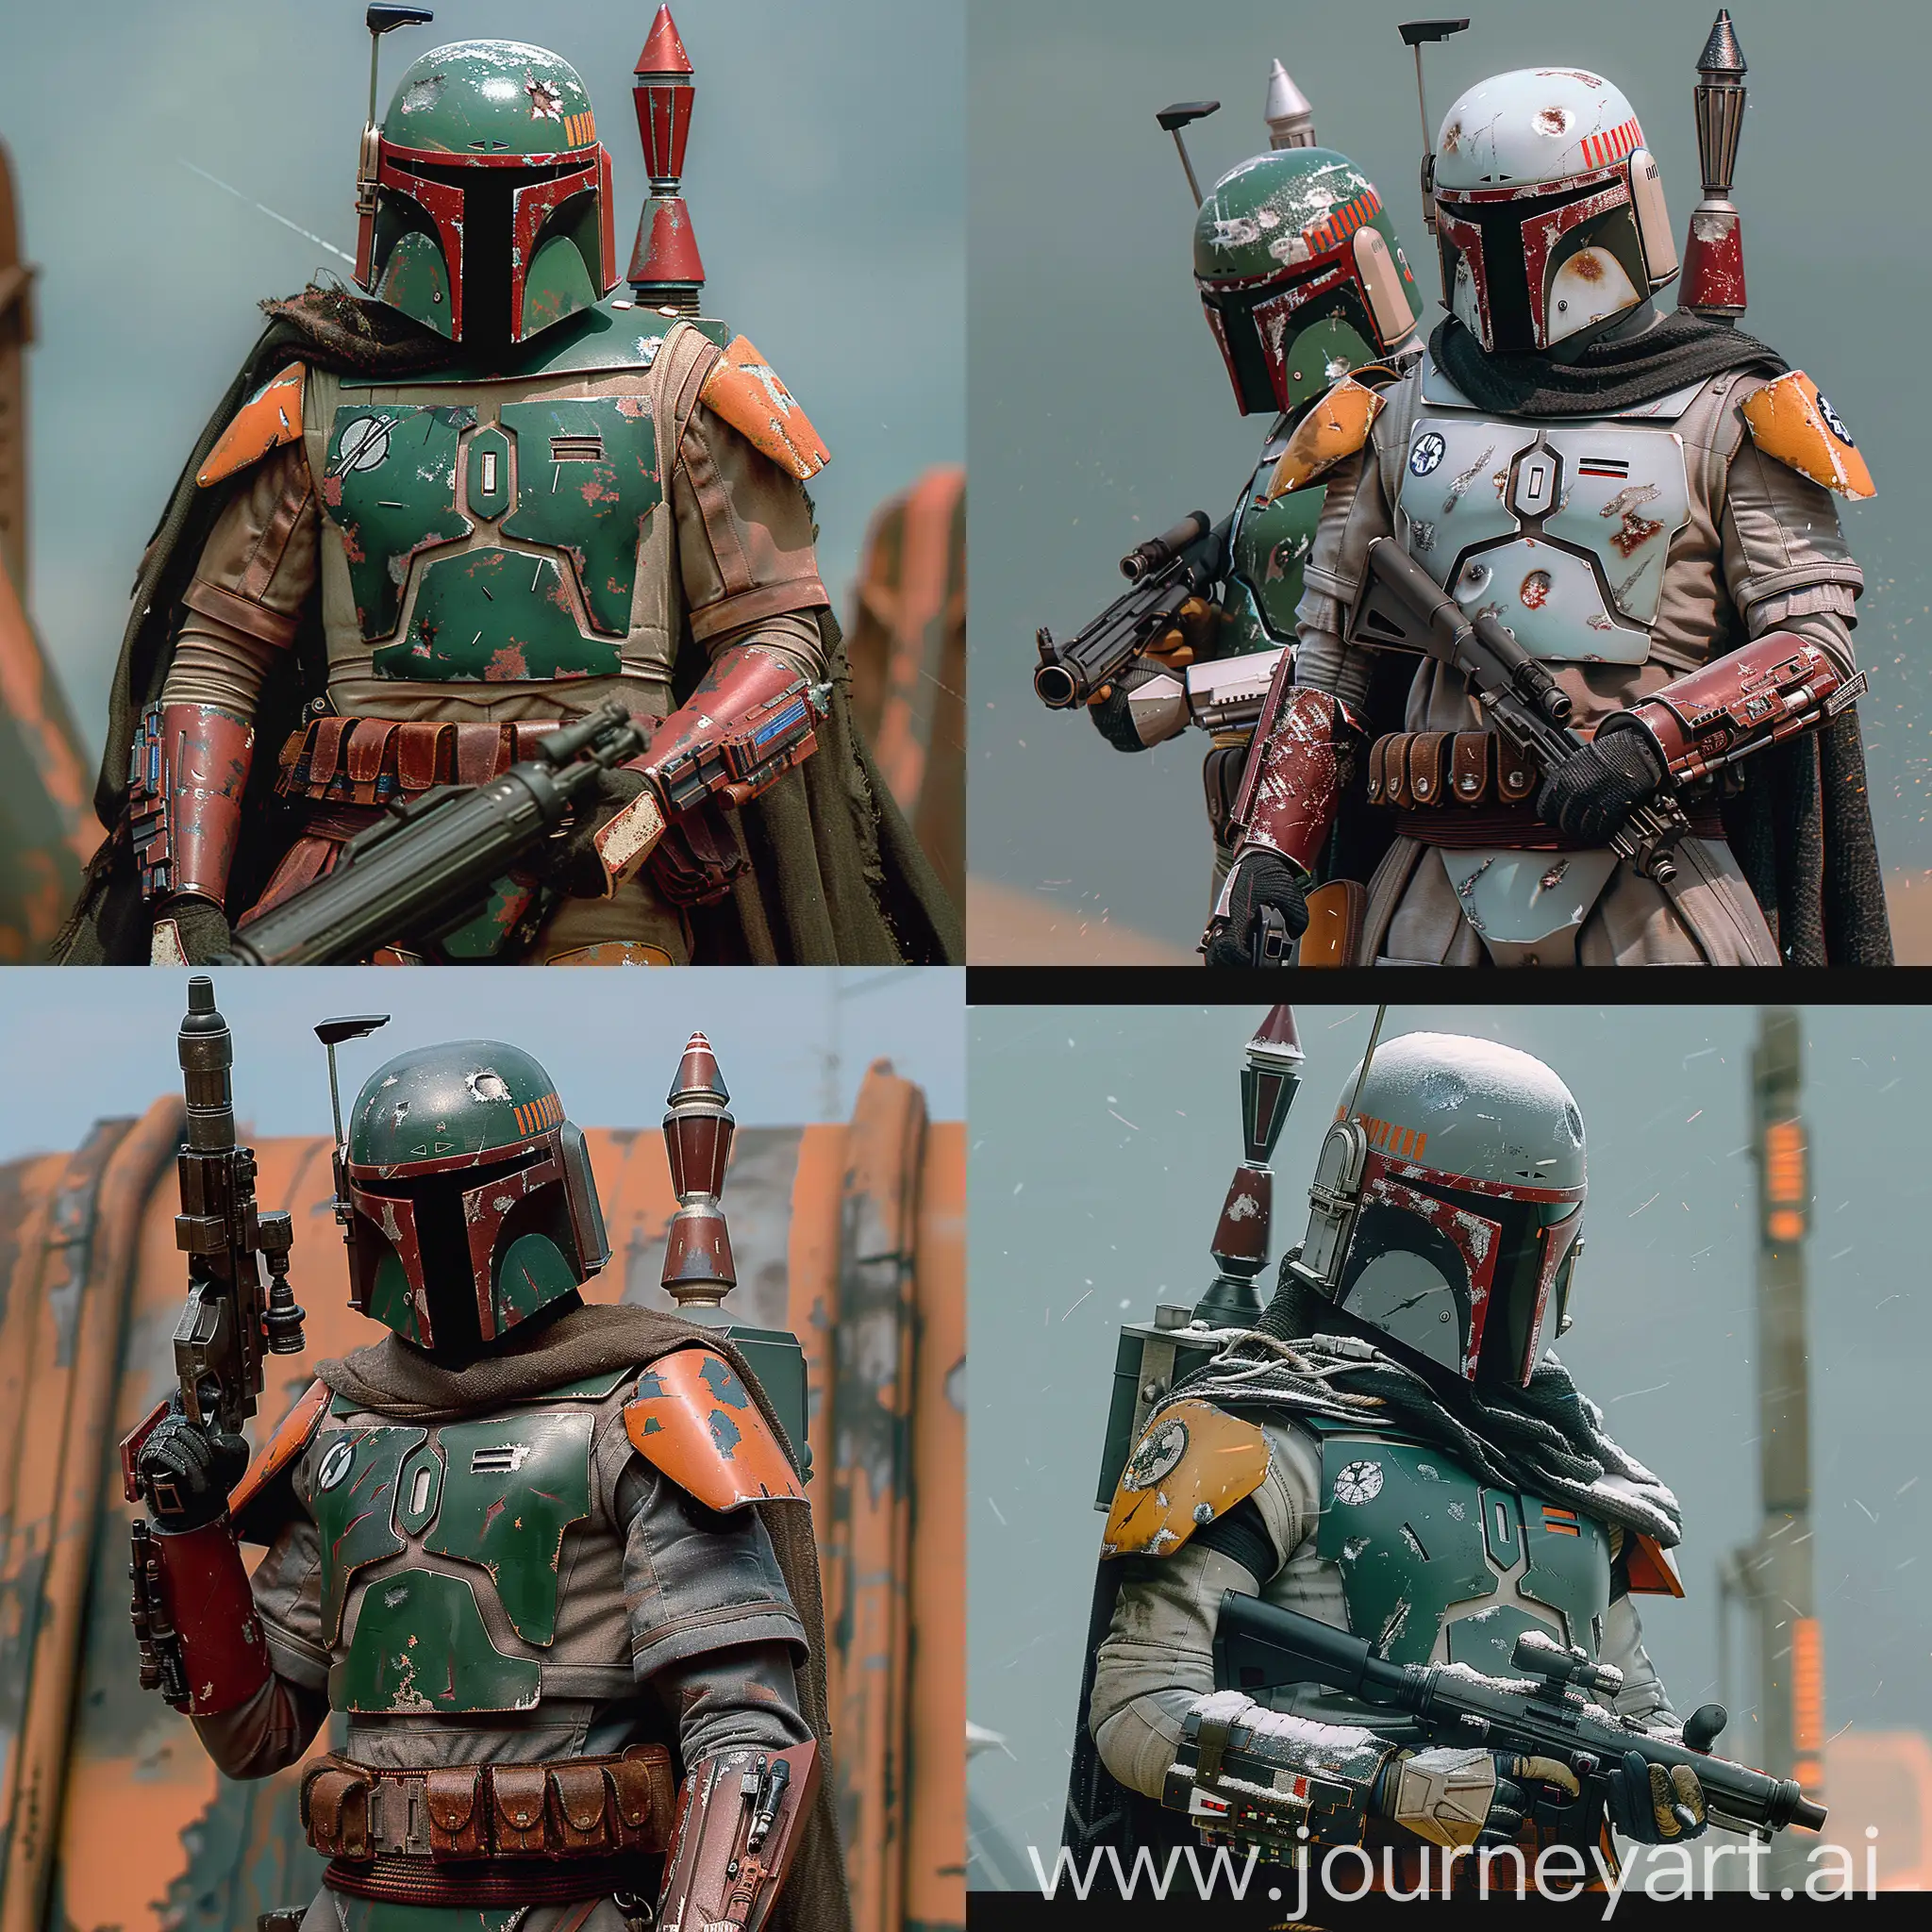 Futuristic Star Wars Boba Fett https://static.wikia.nocookie.net/d833558d-ba5e-48ea-bff4-81ec489f55b3/smart/width/386/height/259, Advanced AI-powered targeting system, Personal drone companion, Exoskeleton armor, Stealth camouflage technology, Energy shield technology, Multi-functional gauntlet, Enhanced sensory perception, Personalized spacecraft, Adaptive camouflage technology, Integrated communication systems, Sleek and angular armor design, Integrated technology, Dark and mysterious color palette, Modular design elements, Textured and weathered finishes, Utility belts and pouches, Unique helmet shapes, Geometric patterns and detailing, Mixed materials and textures, Futuristic accessories, octane render --stylize 1000